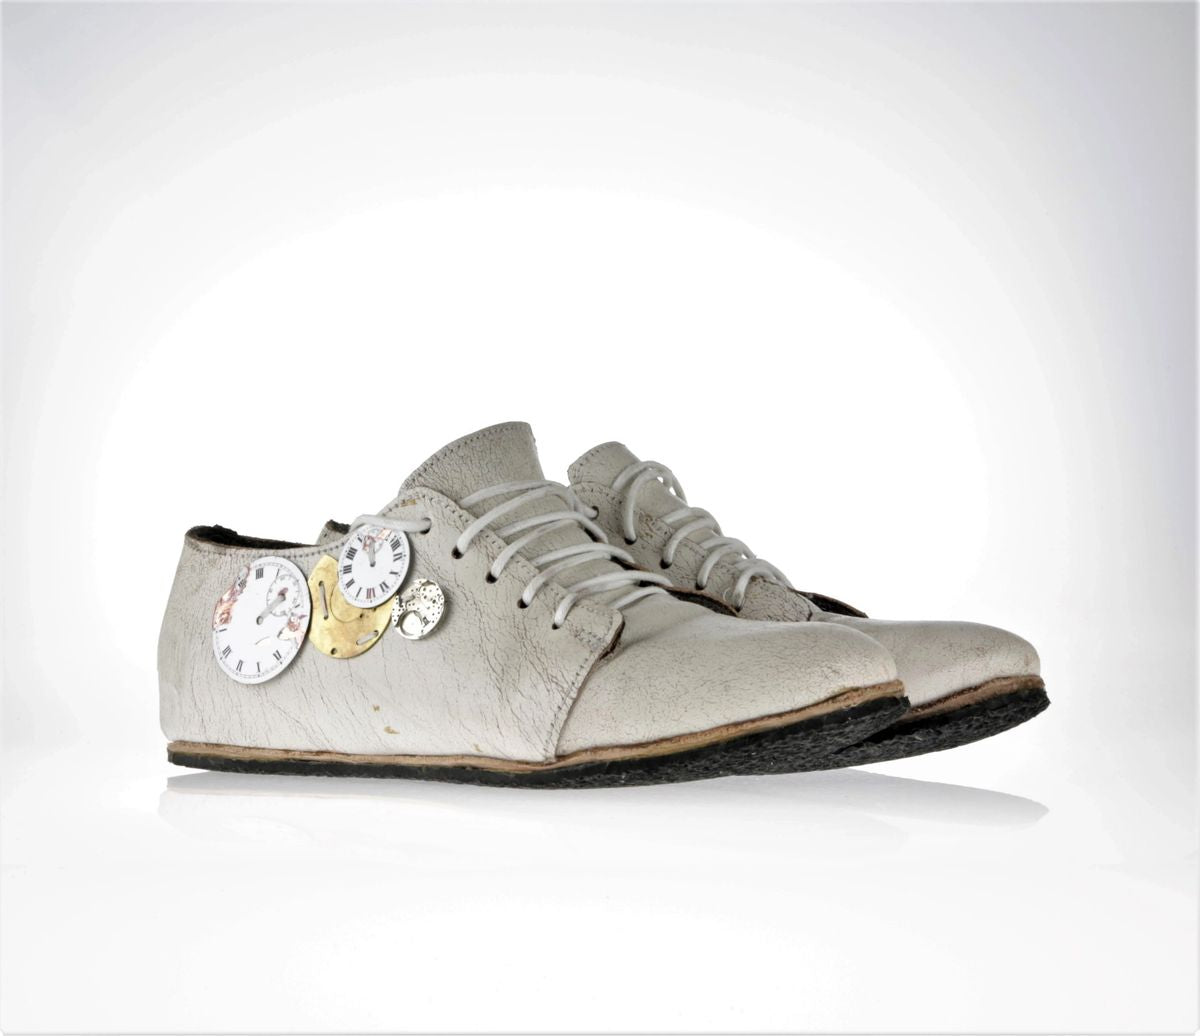 Lateral view of one of the shoes with the focus on the clock pieces - different sizes and colors (white and gold)